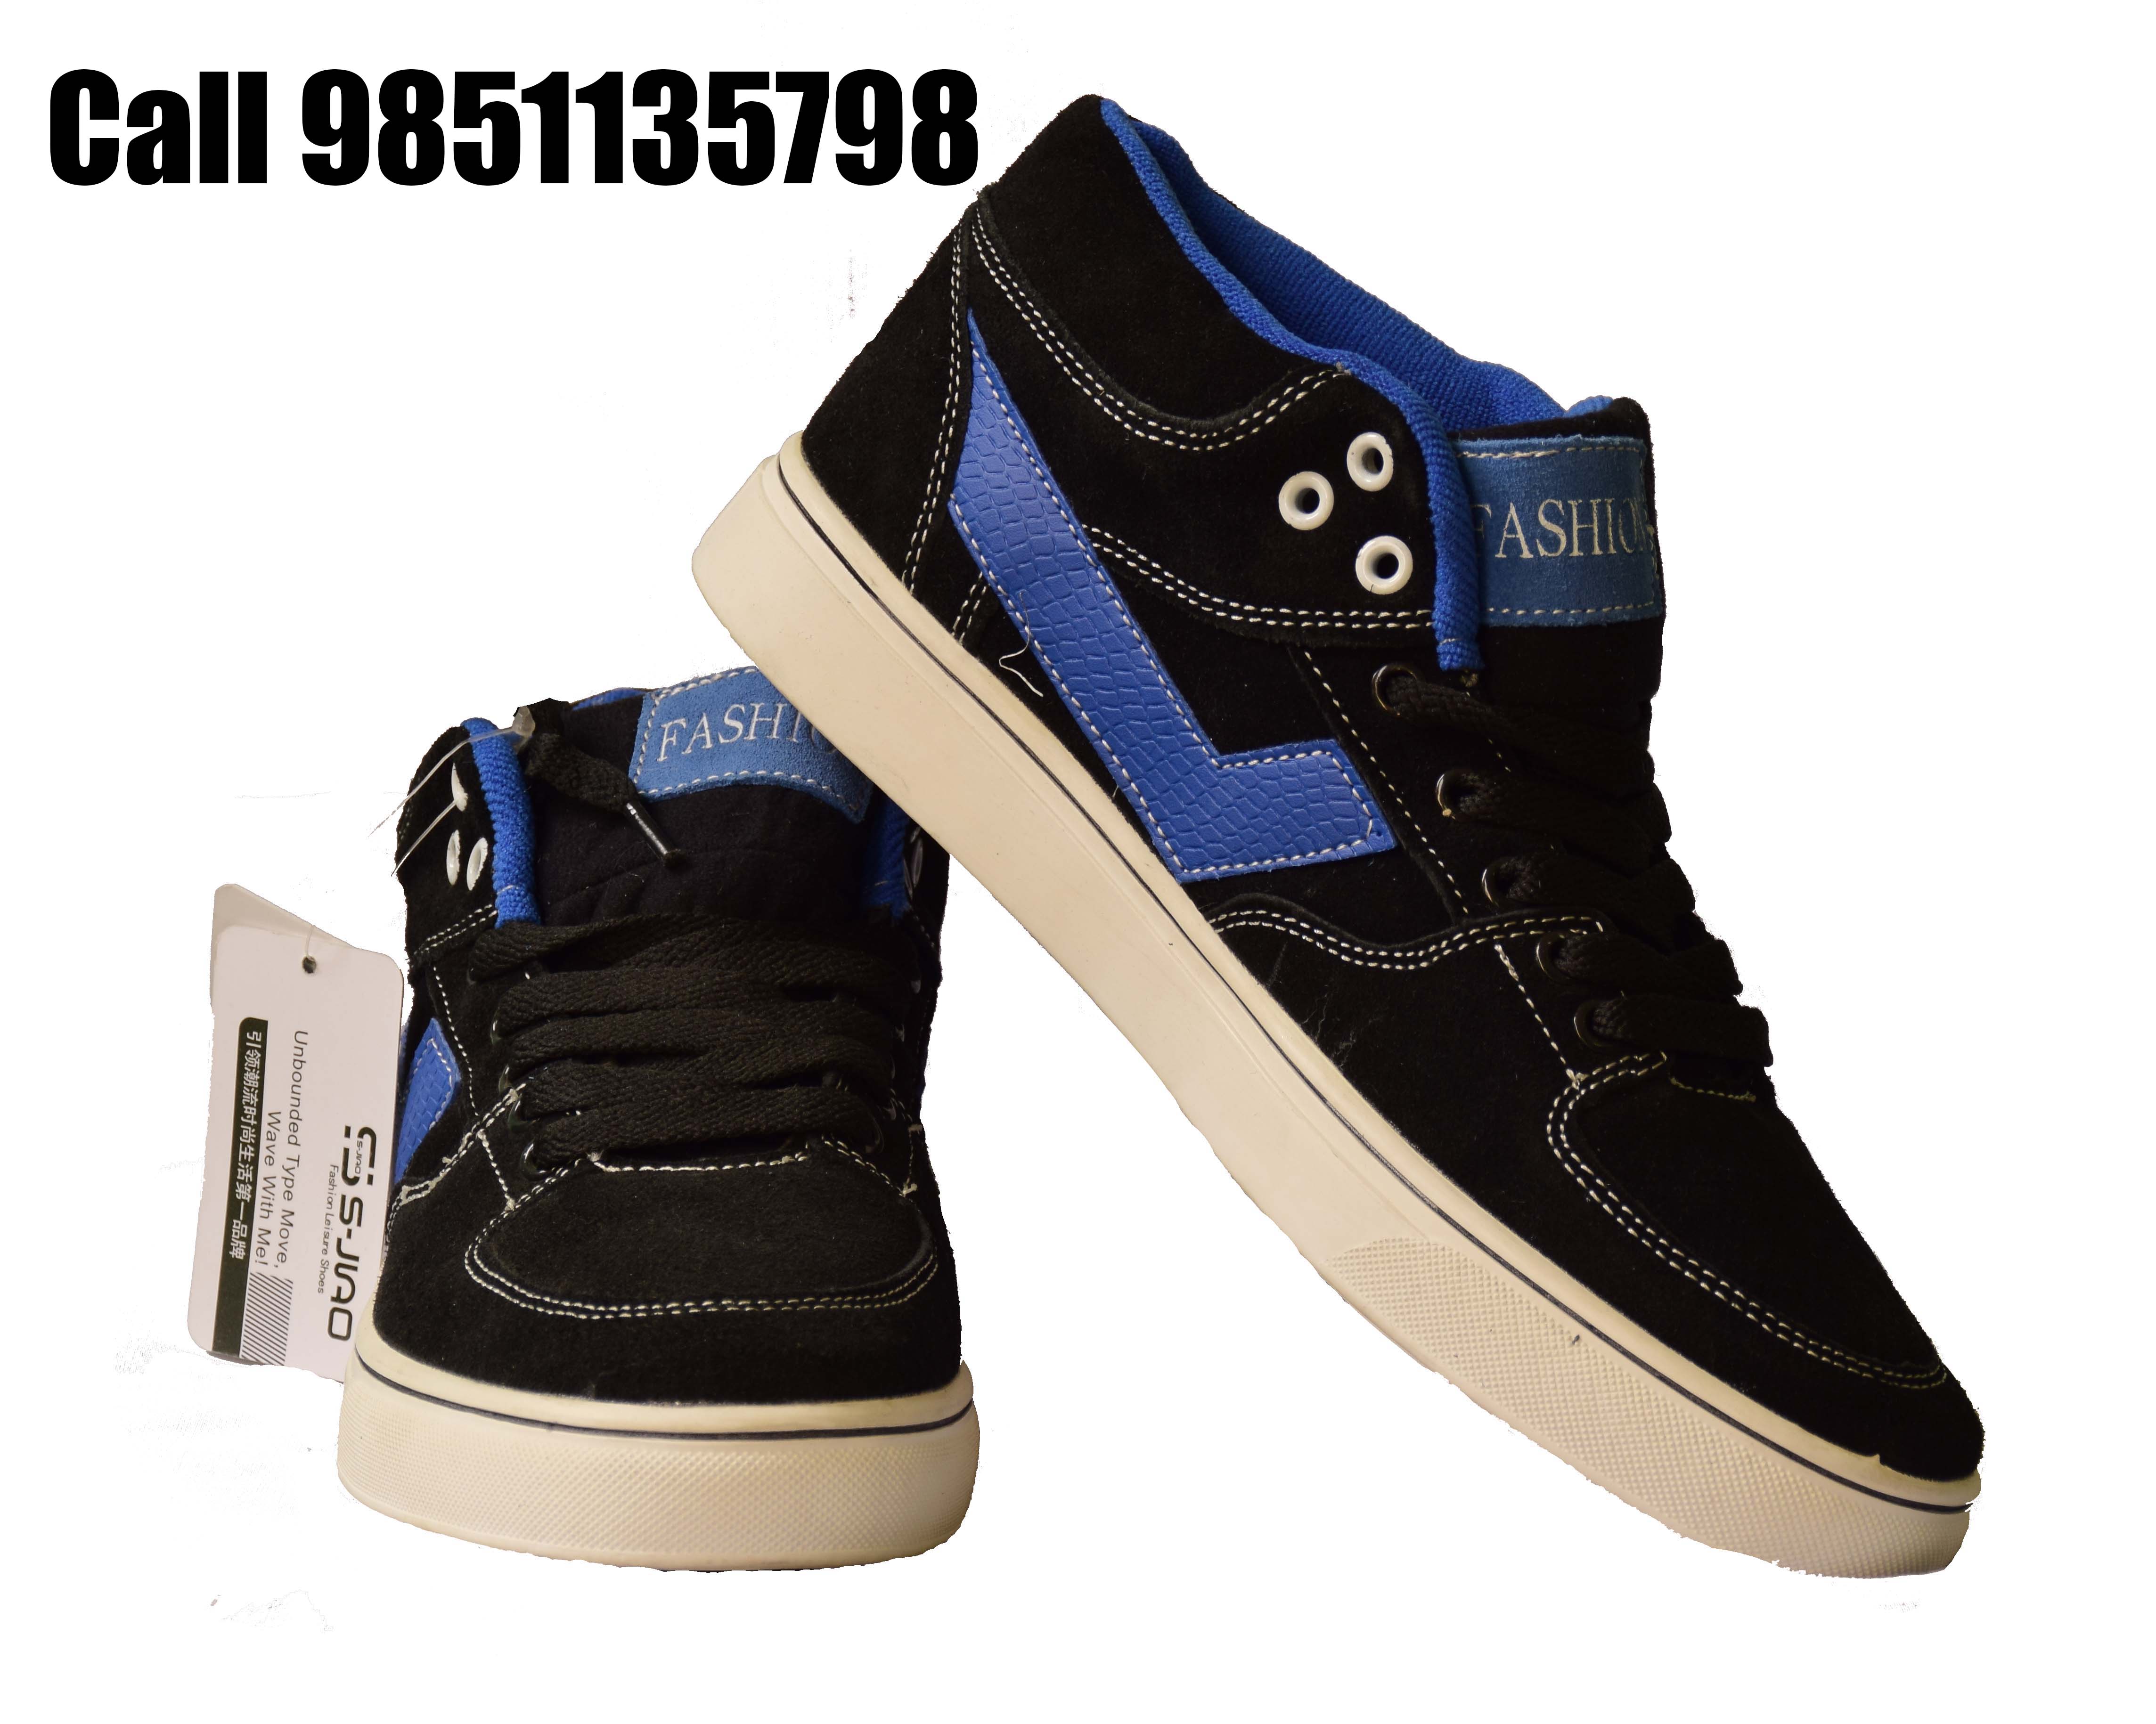 Wholesale Shoes by Anup Bajracharya, Nepal - Online Shopping by NepBay.